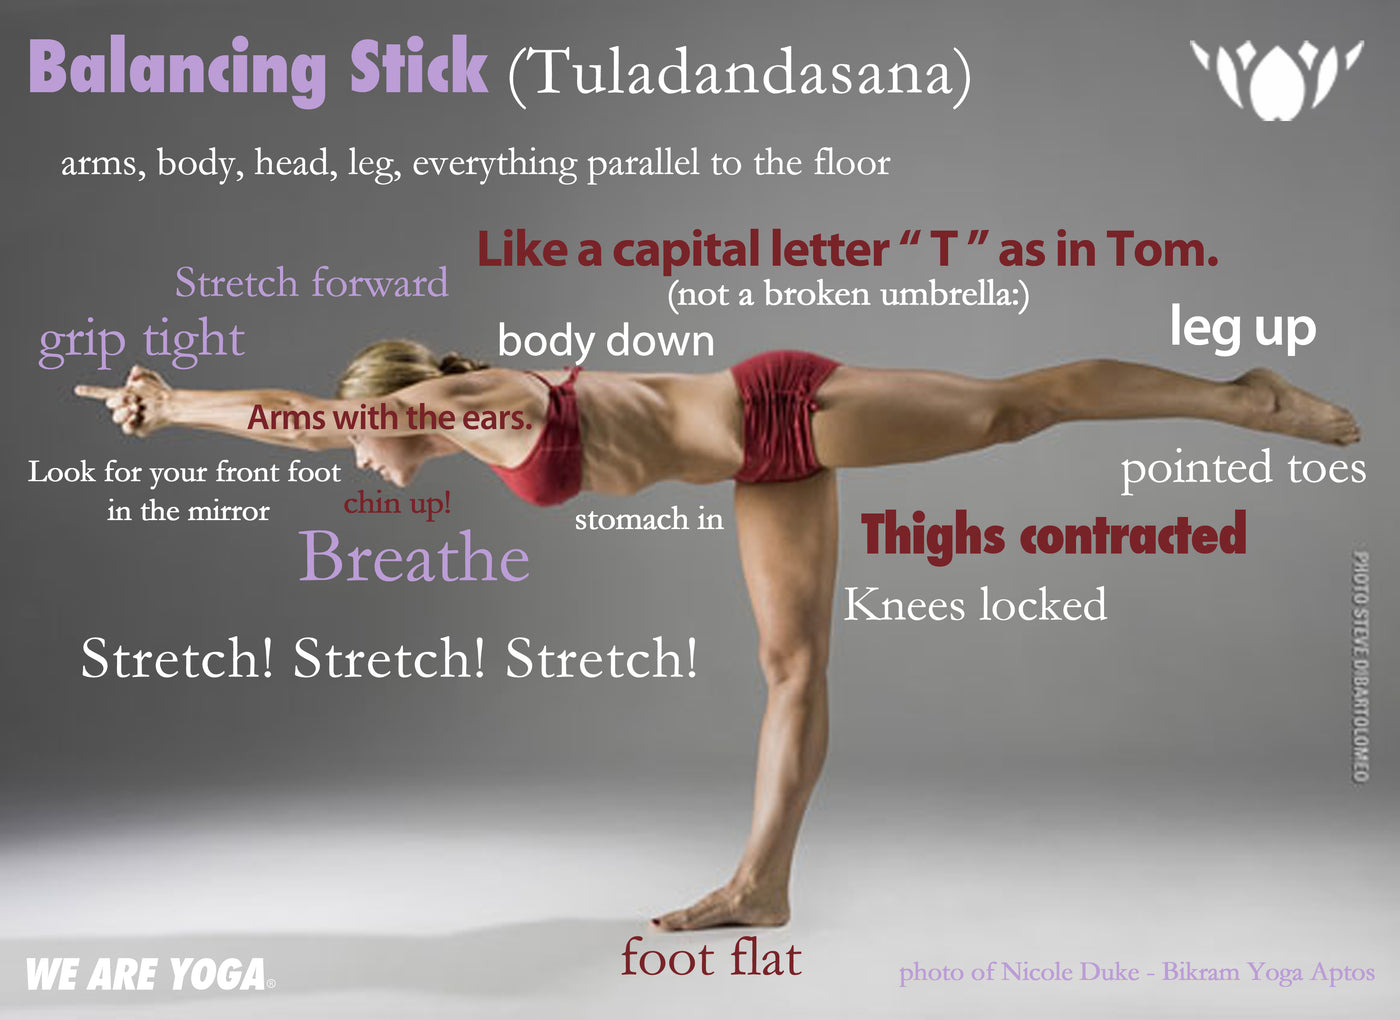 Balancing stick pose is one of the Hot26 postures. It has so many bene